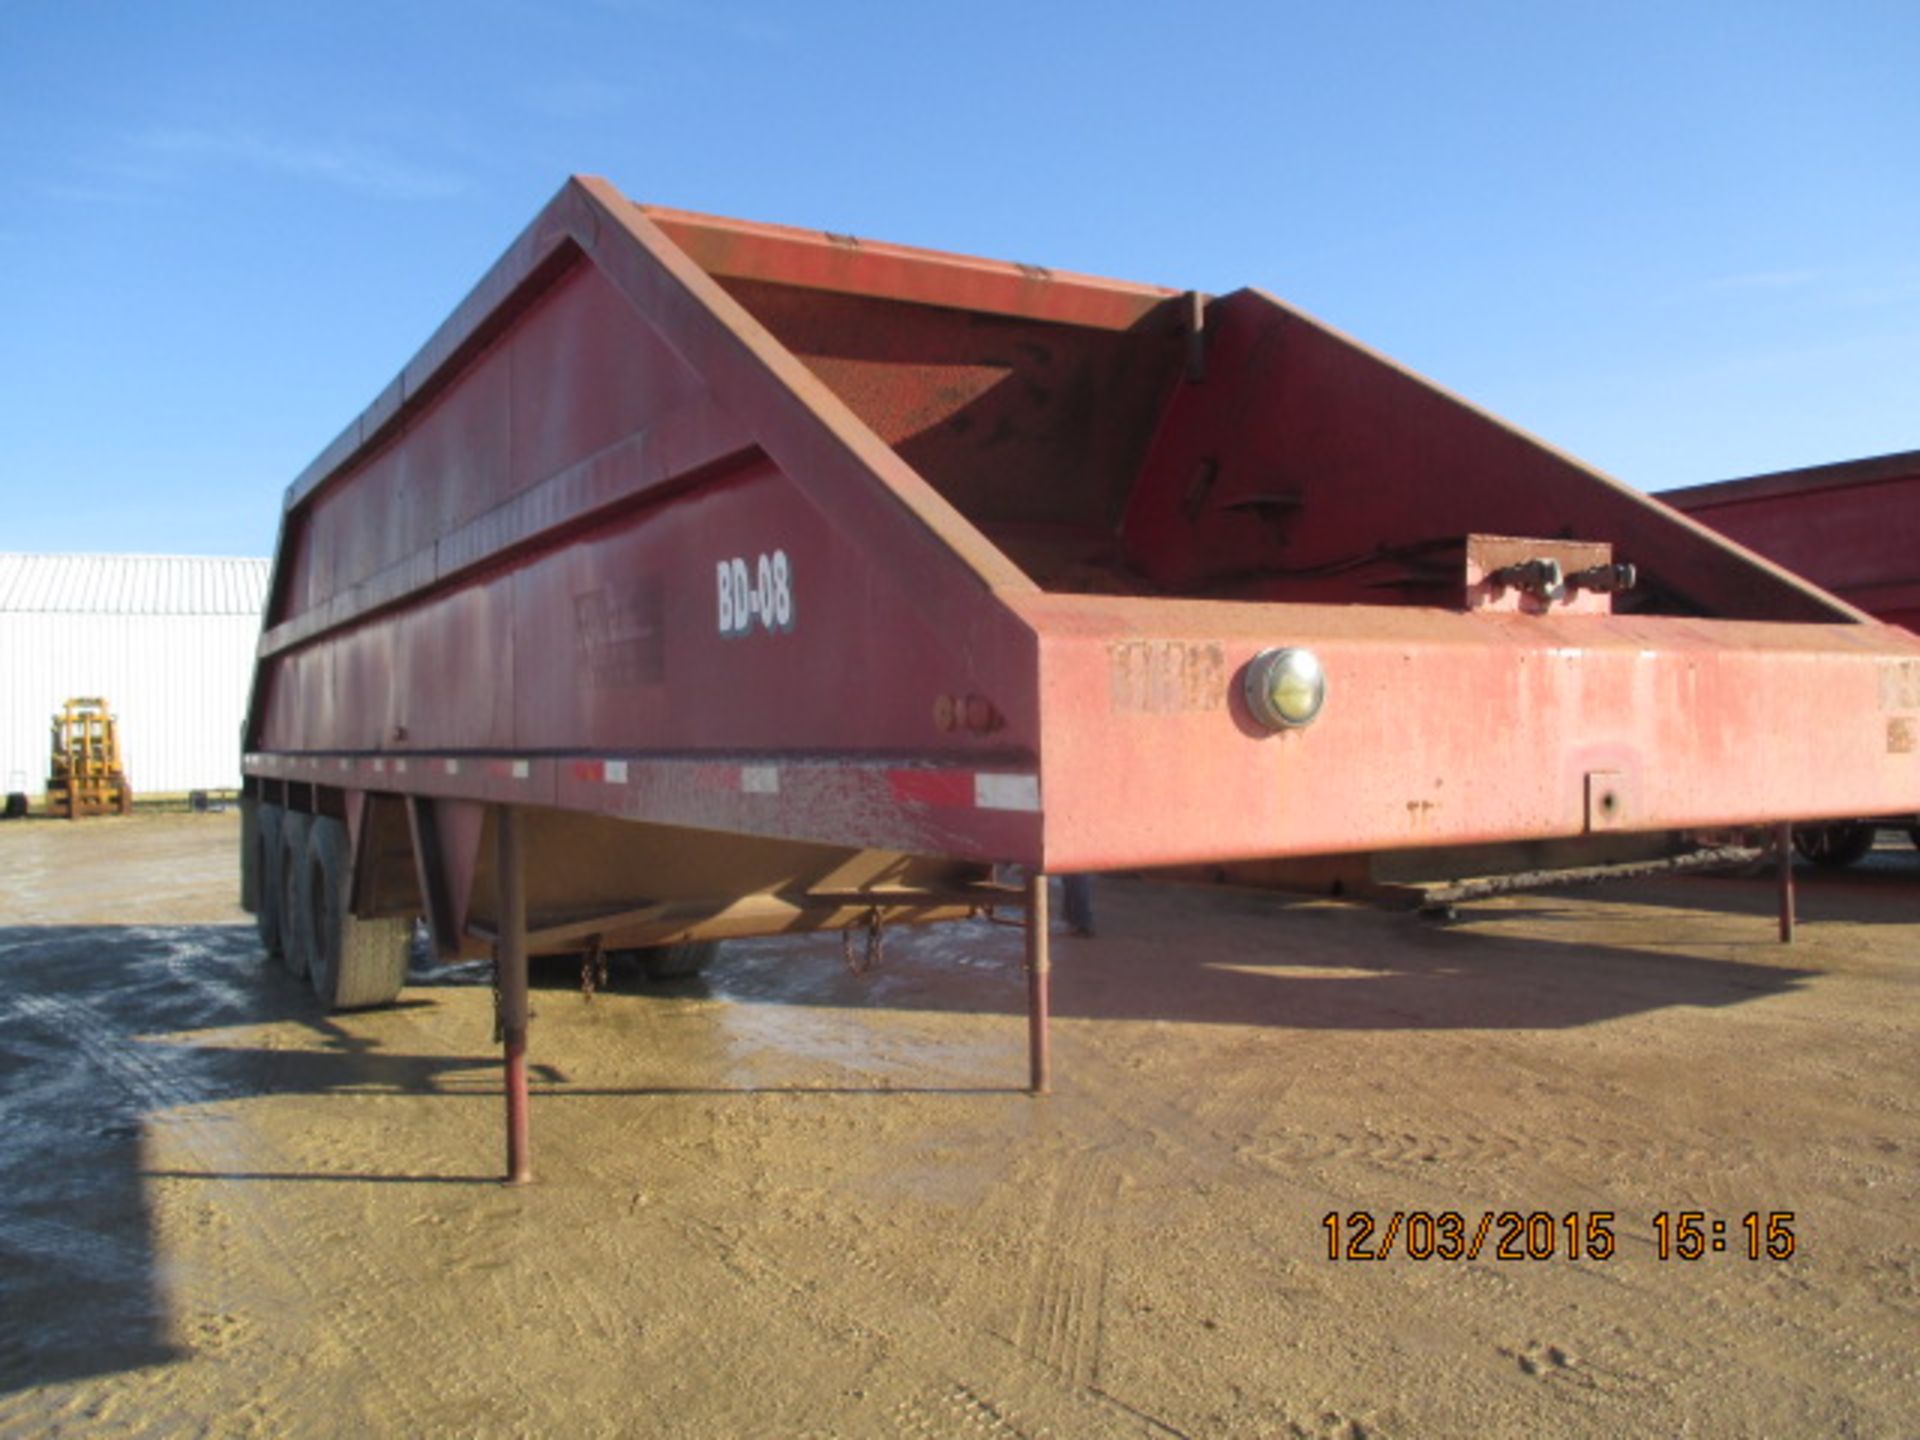 TITLE-Homemade tri-axle belly dump, VIN:HMDS834309R003175, unit BD-08 - Image 2 of 5